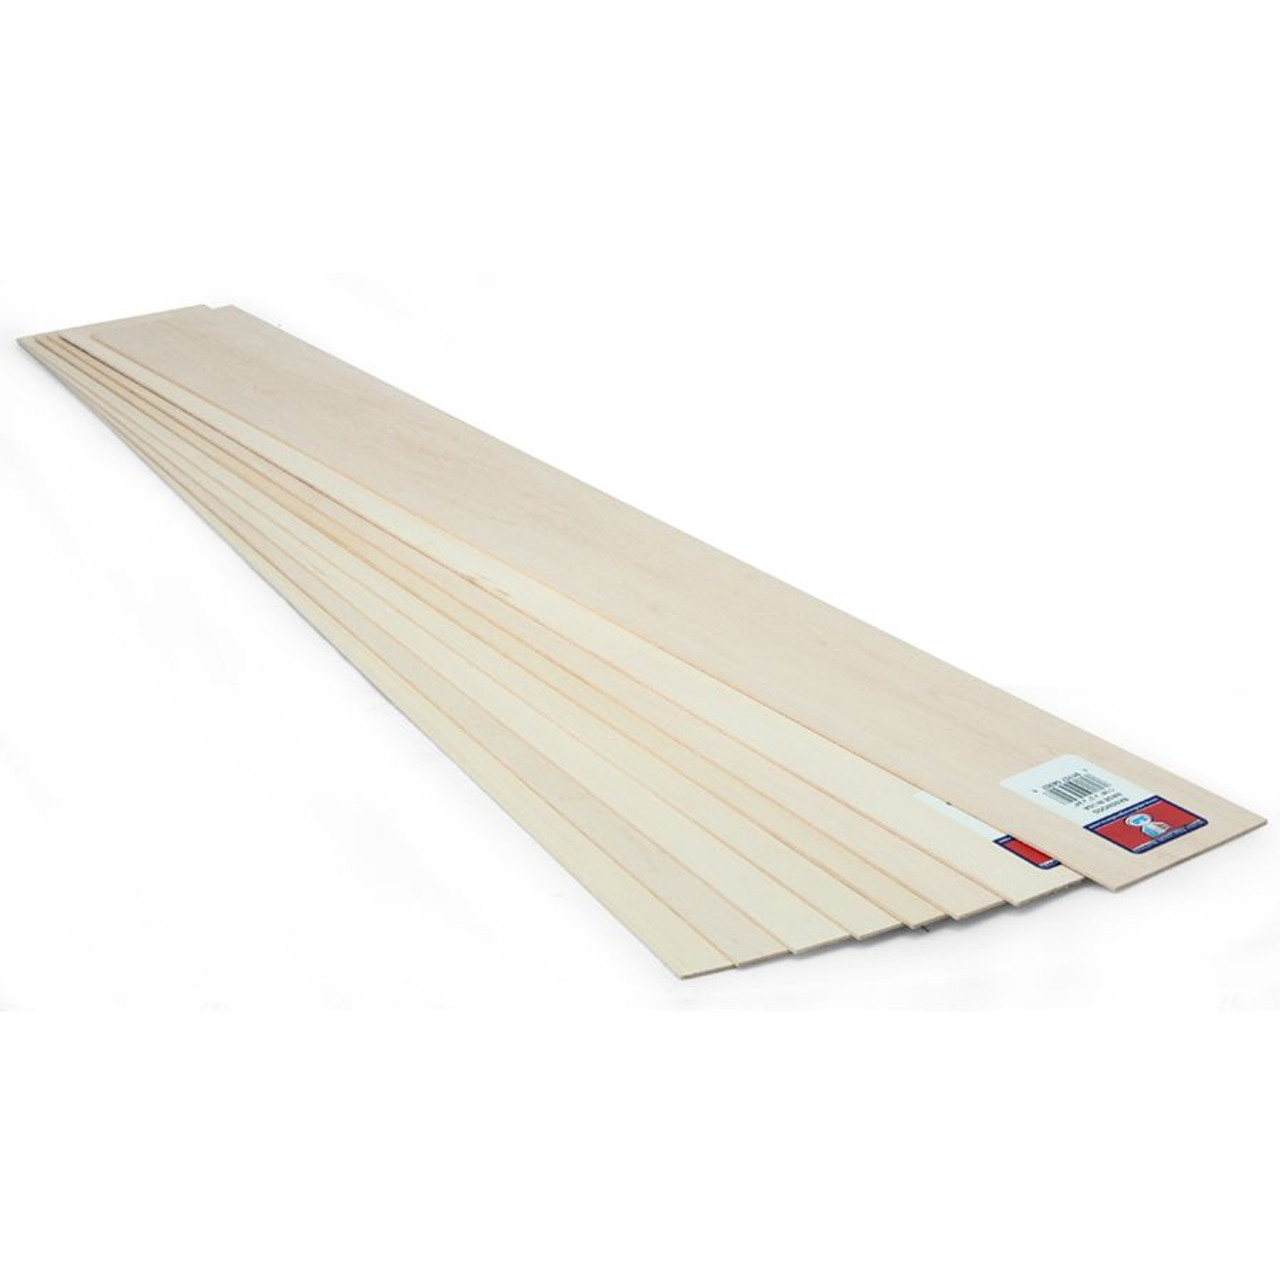 Midwest Basswood Sheets 3/16 x 3 x 24